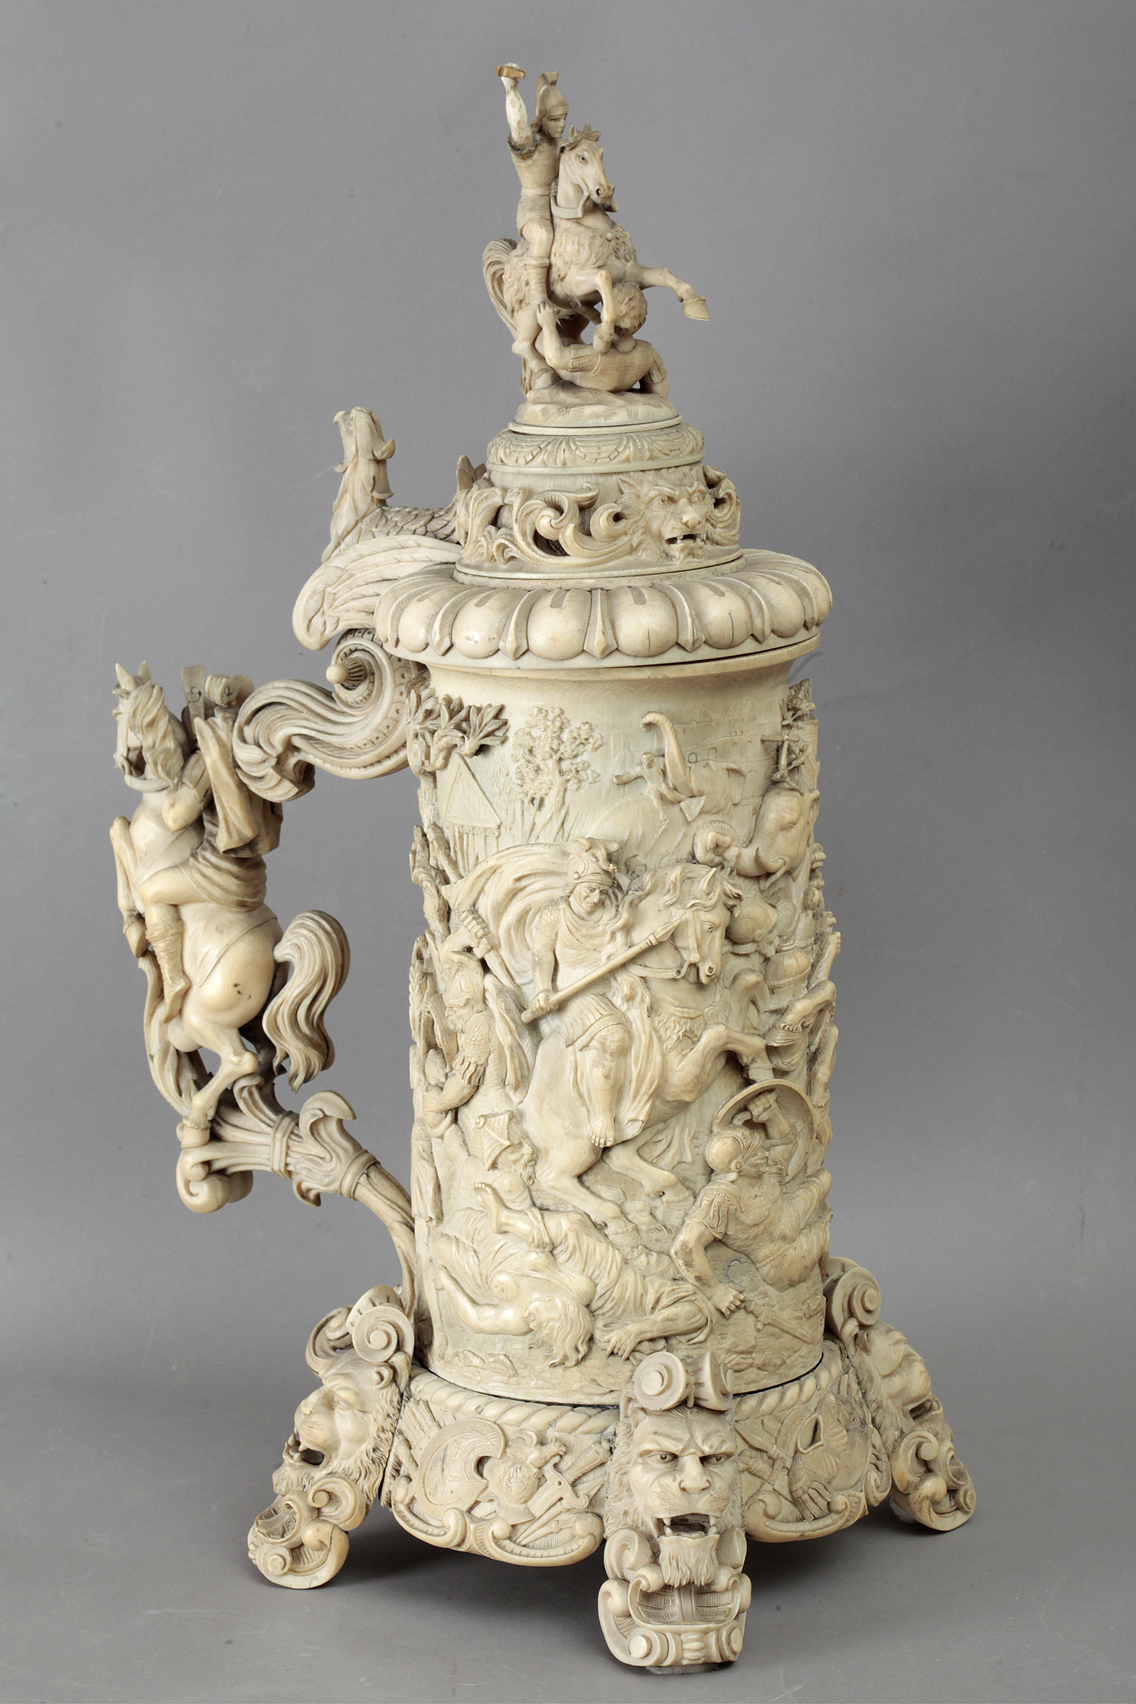 A 19th century carved ivory tankard, Central Europe